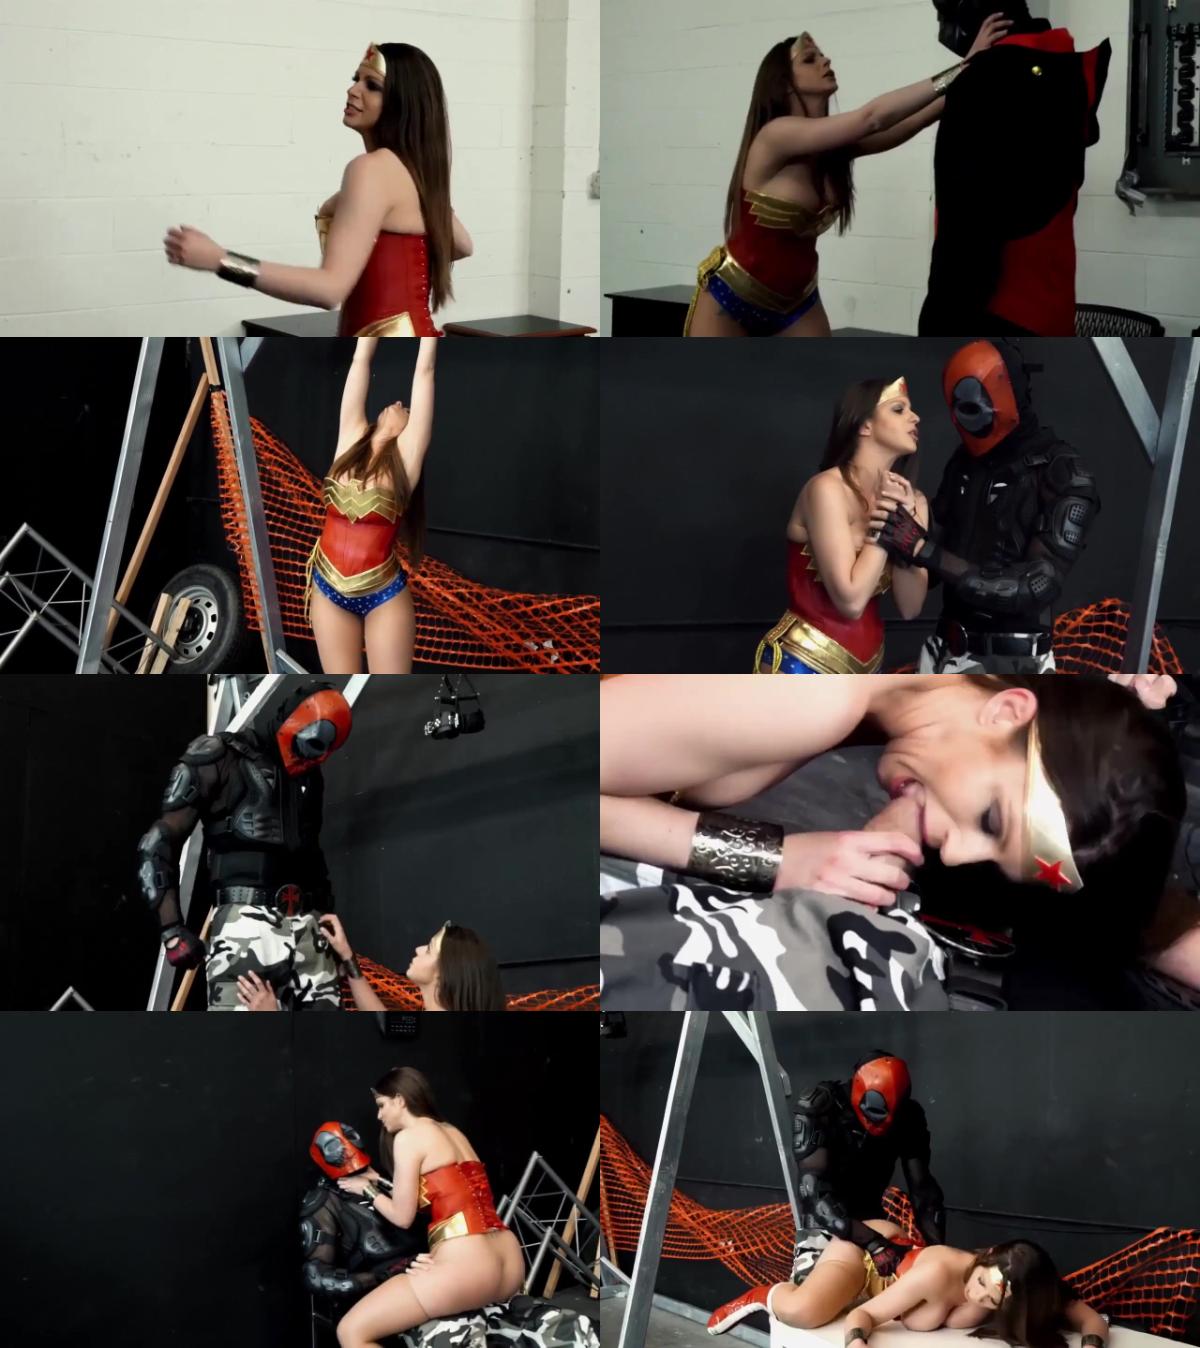 wonder woman trapped tortured transformed